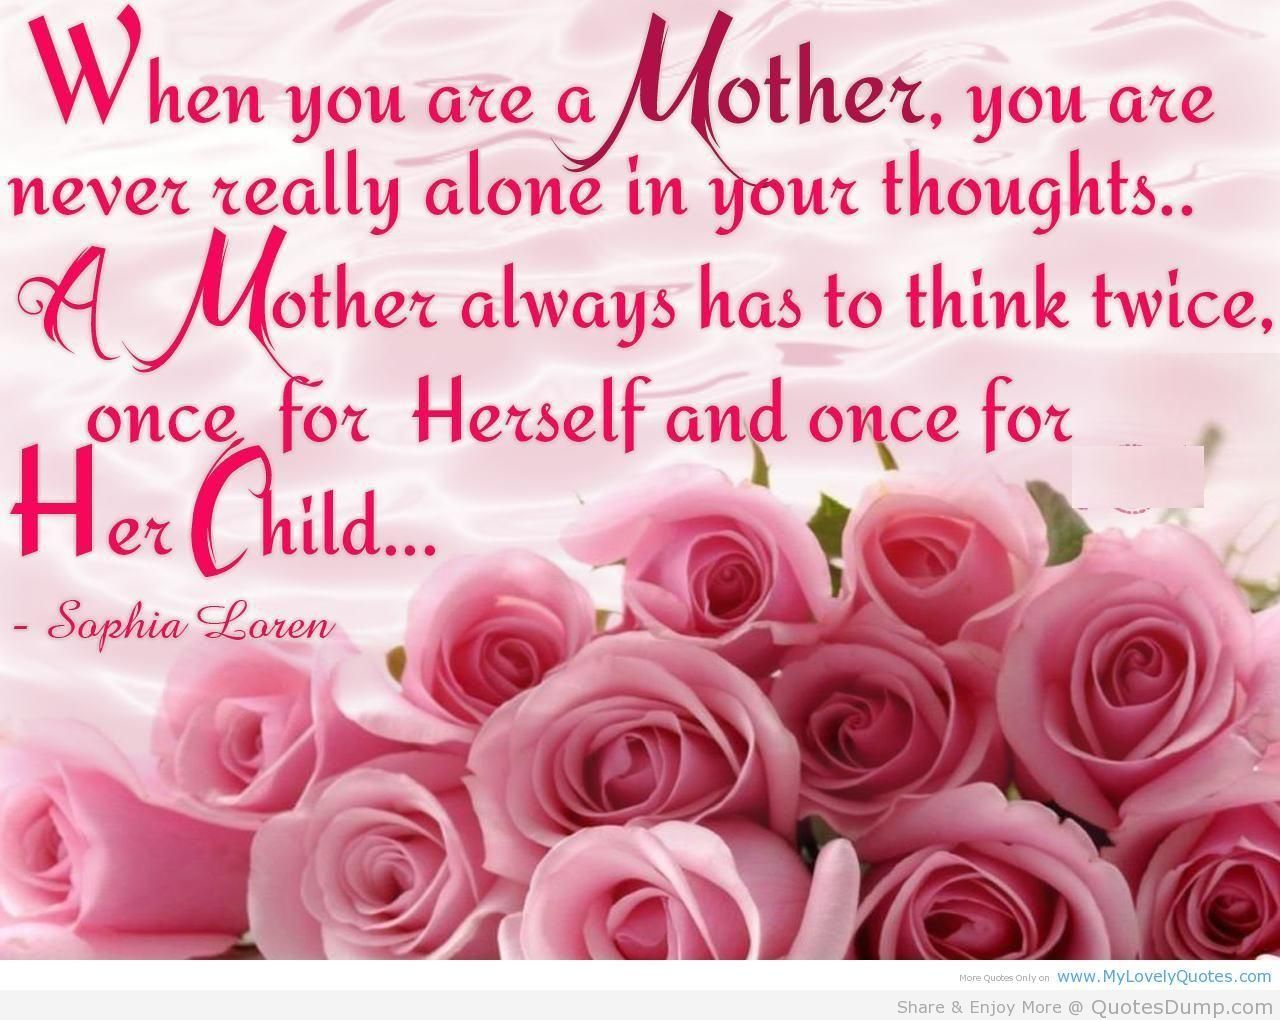 Happy Mothers Day Quotes and Sayings. Happy mother day quotes